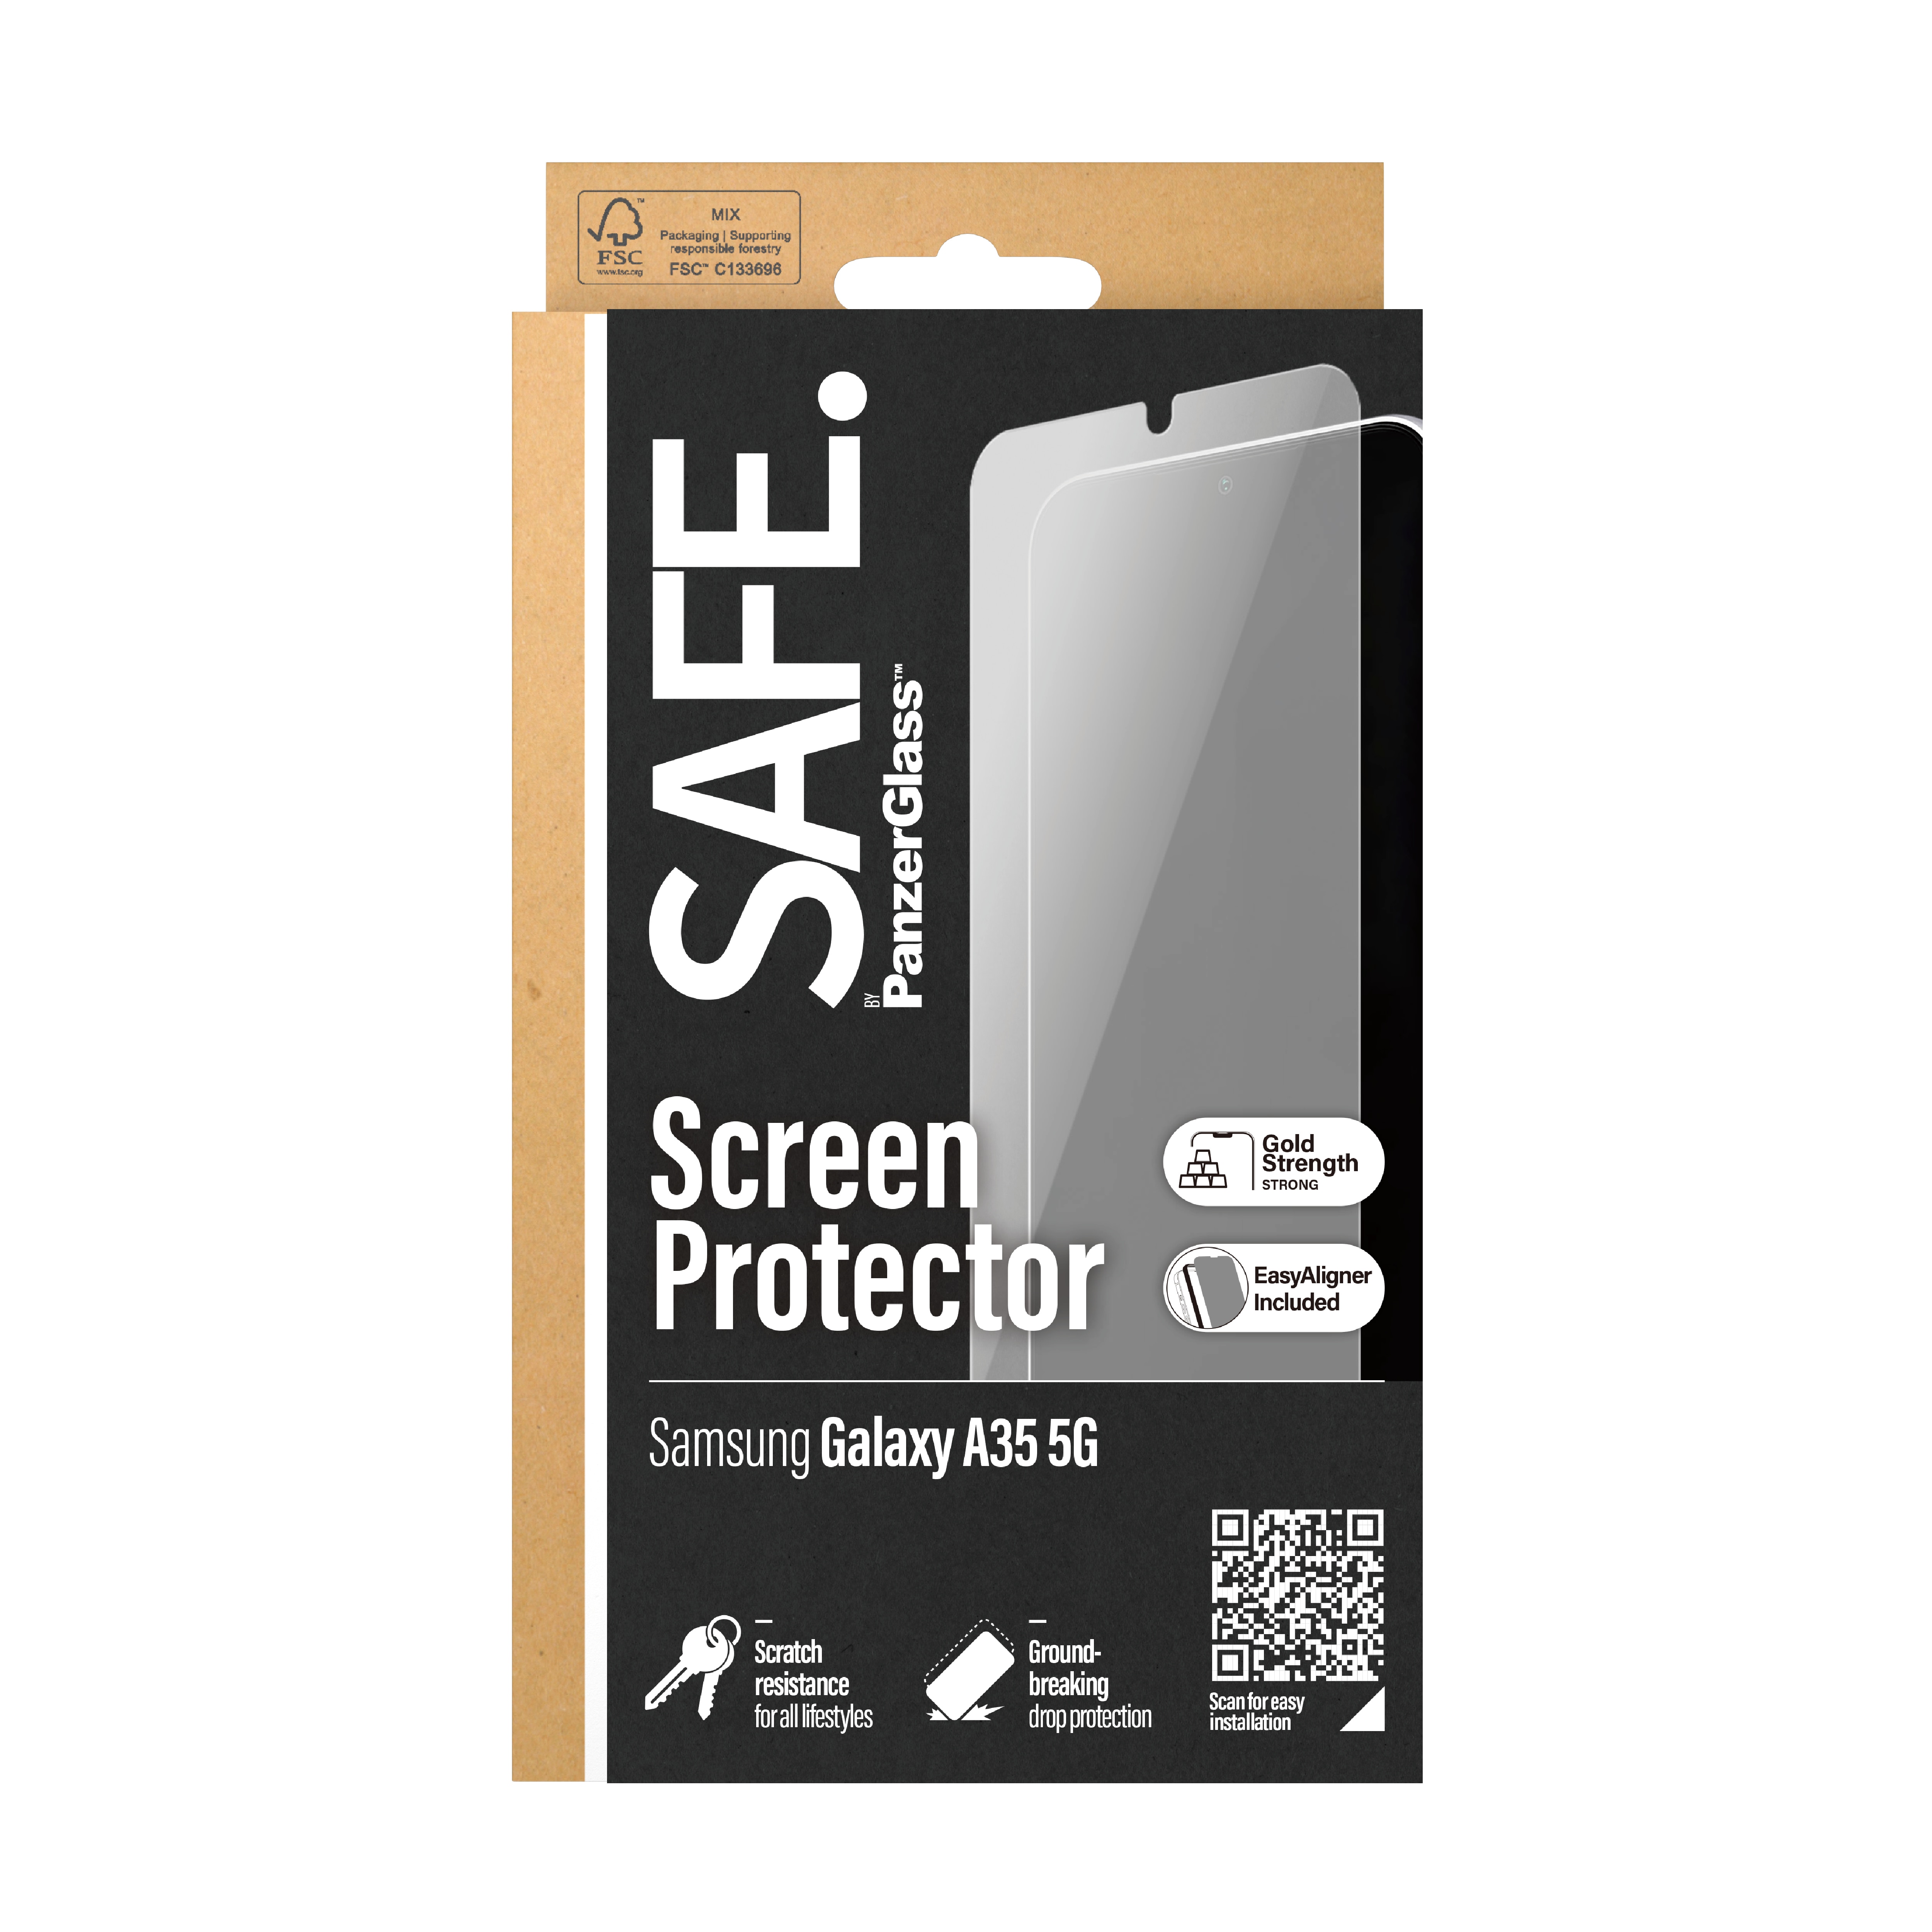 Samsung Galaxy A35 Screen Protector Ultra Wide Fit (with EasyAligner)